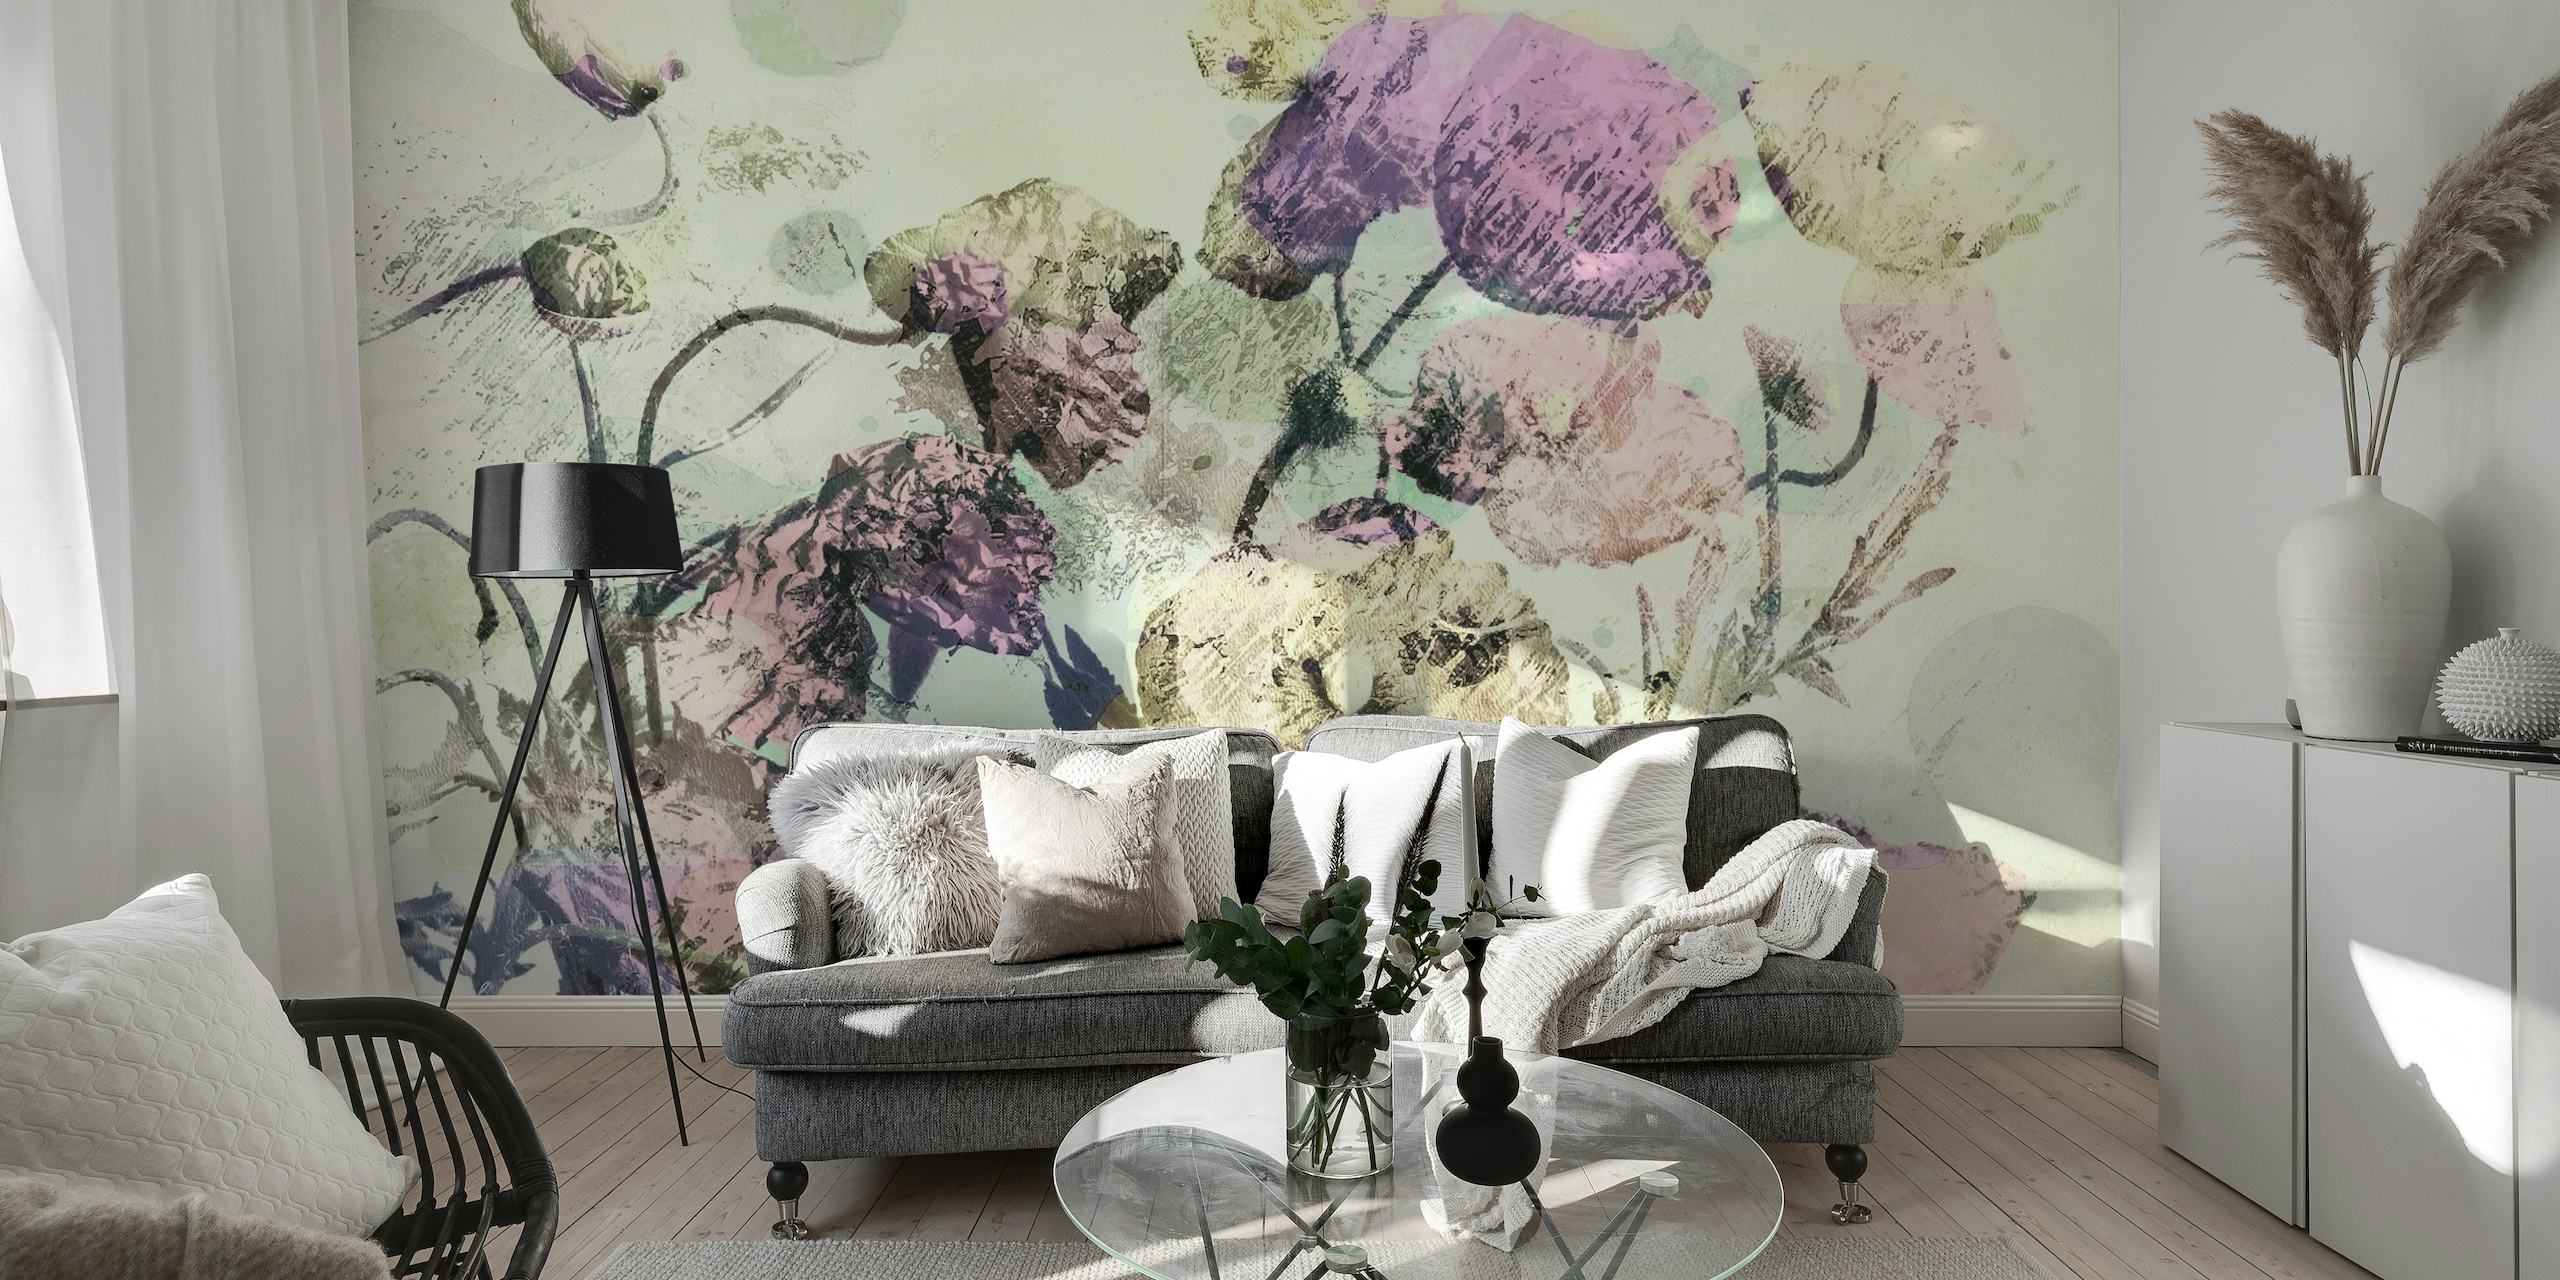 Soft pastel floral wall mural with delicate lavender and blush flowers creating a serene atmosphere.